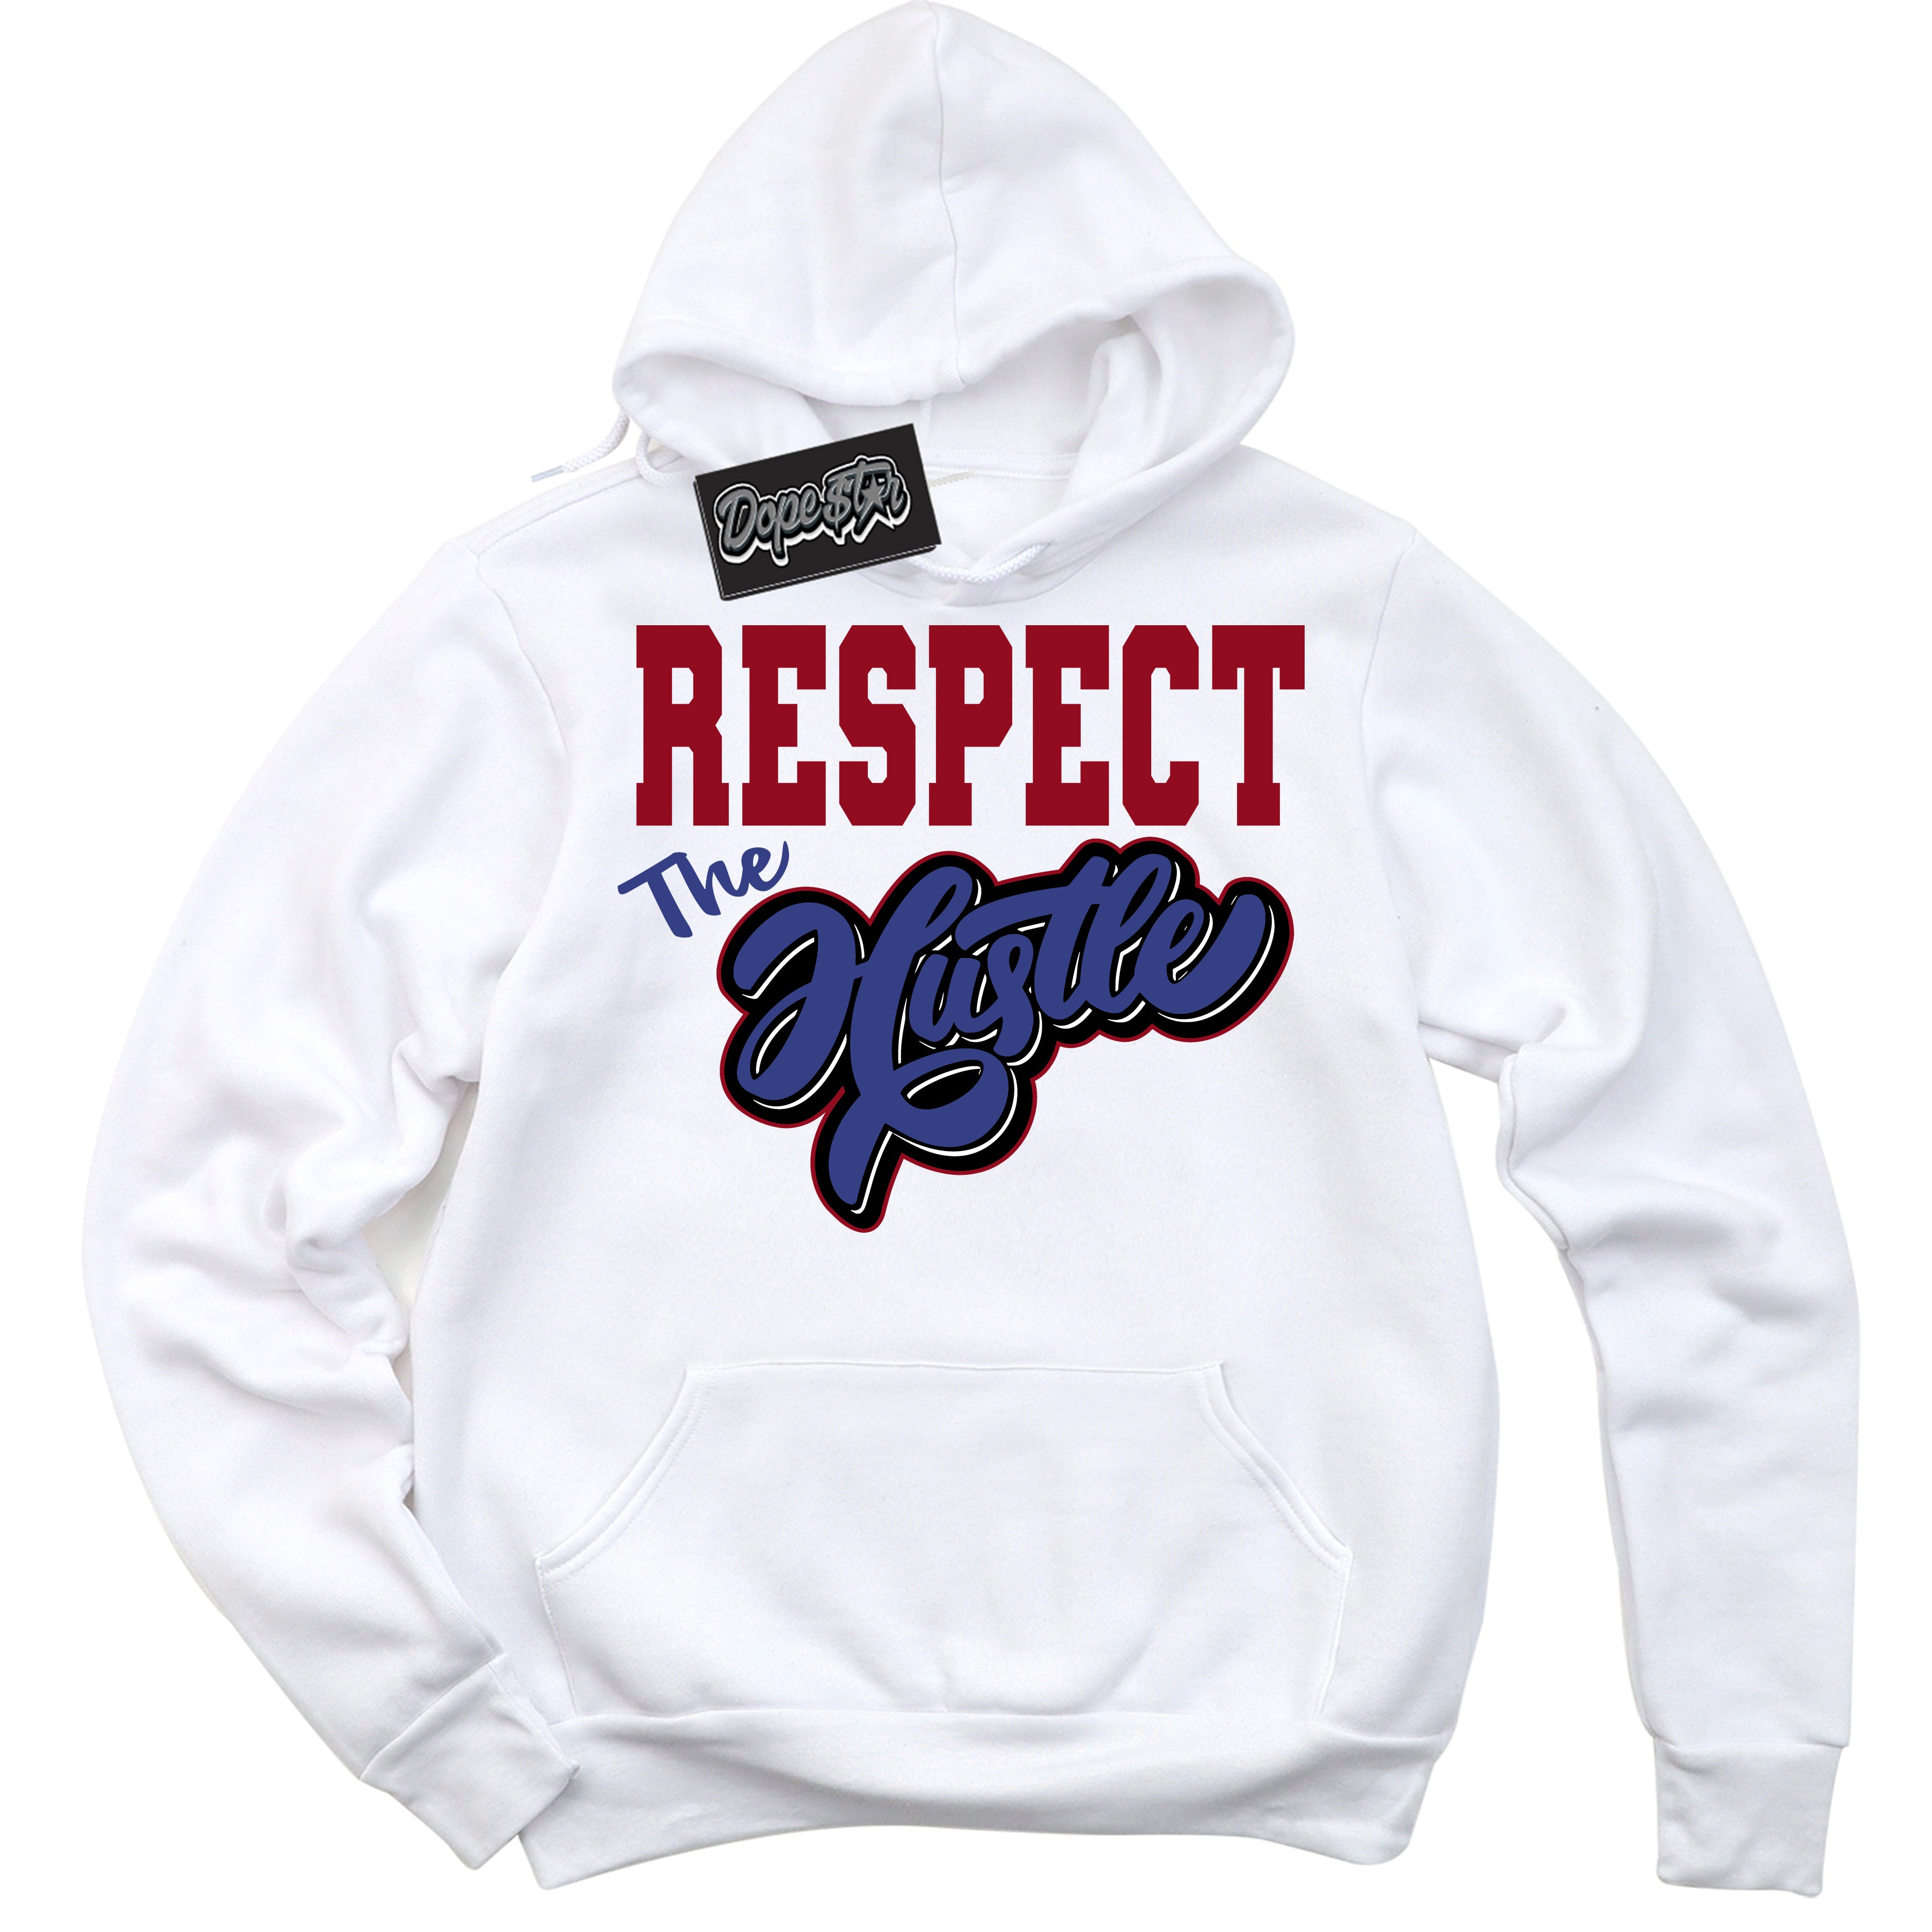 Cool White Hoodie with “ Respect The Hustle ”  design that Perfectly Matches Playoffs 8s Sneakers.